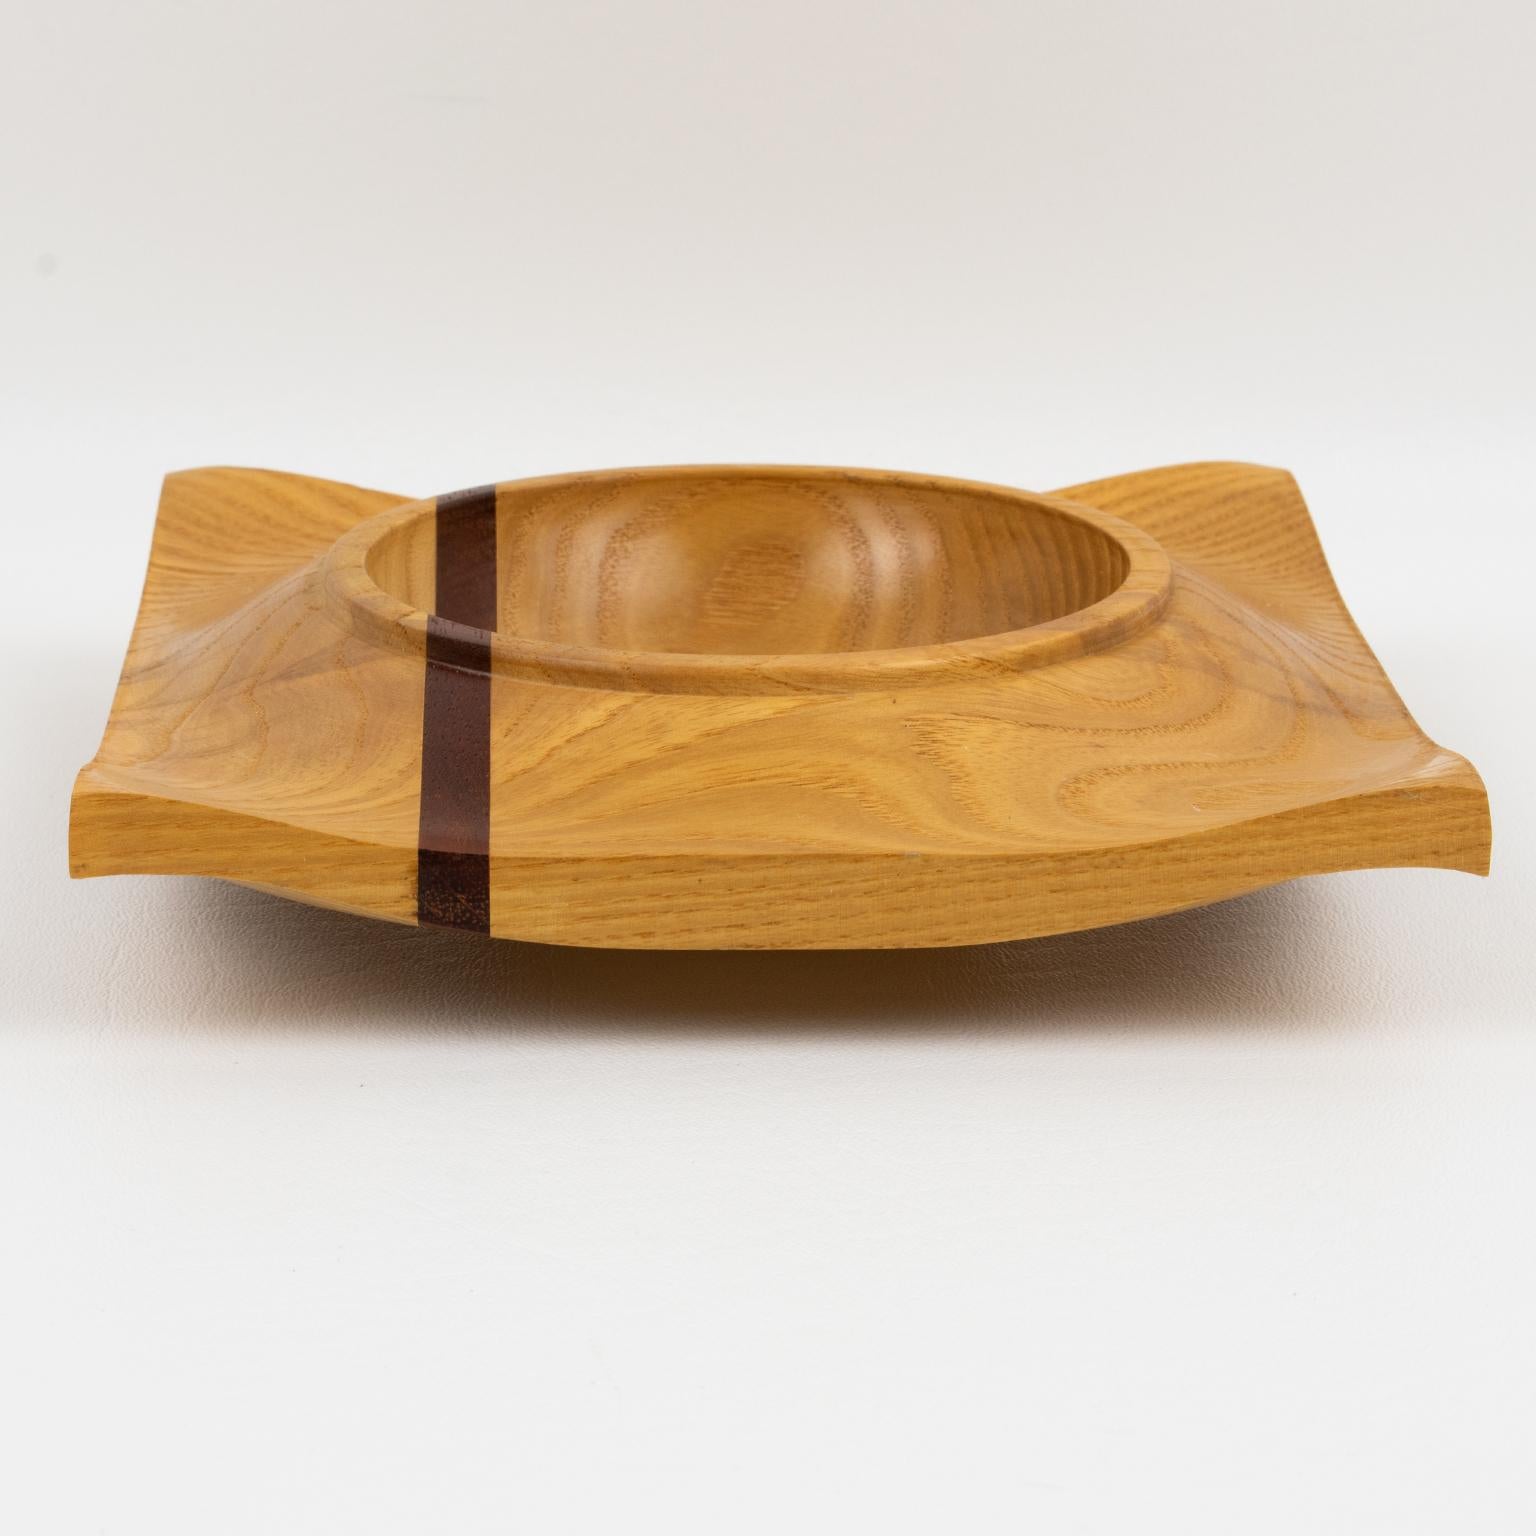 Space Age Danish Carved Wood Bowl Centerpiece Catchall Vide Poche, 1980s In Excellent Condition For Sale In Atlanta, GA